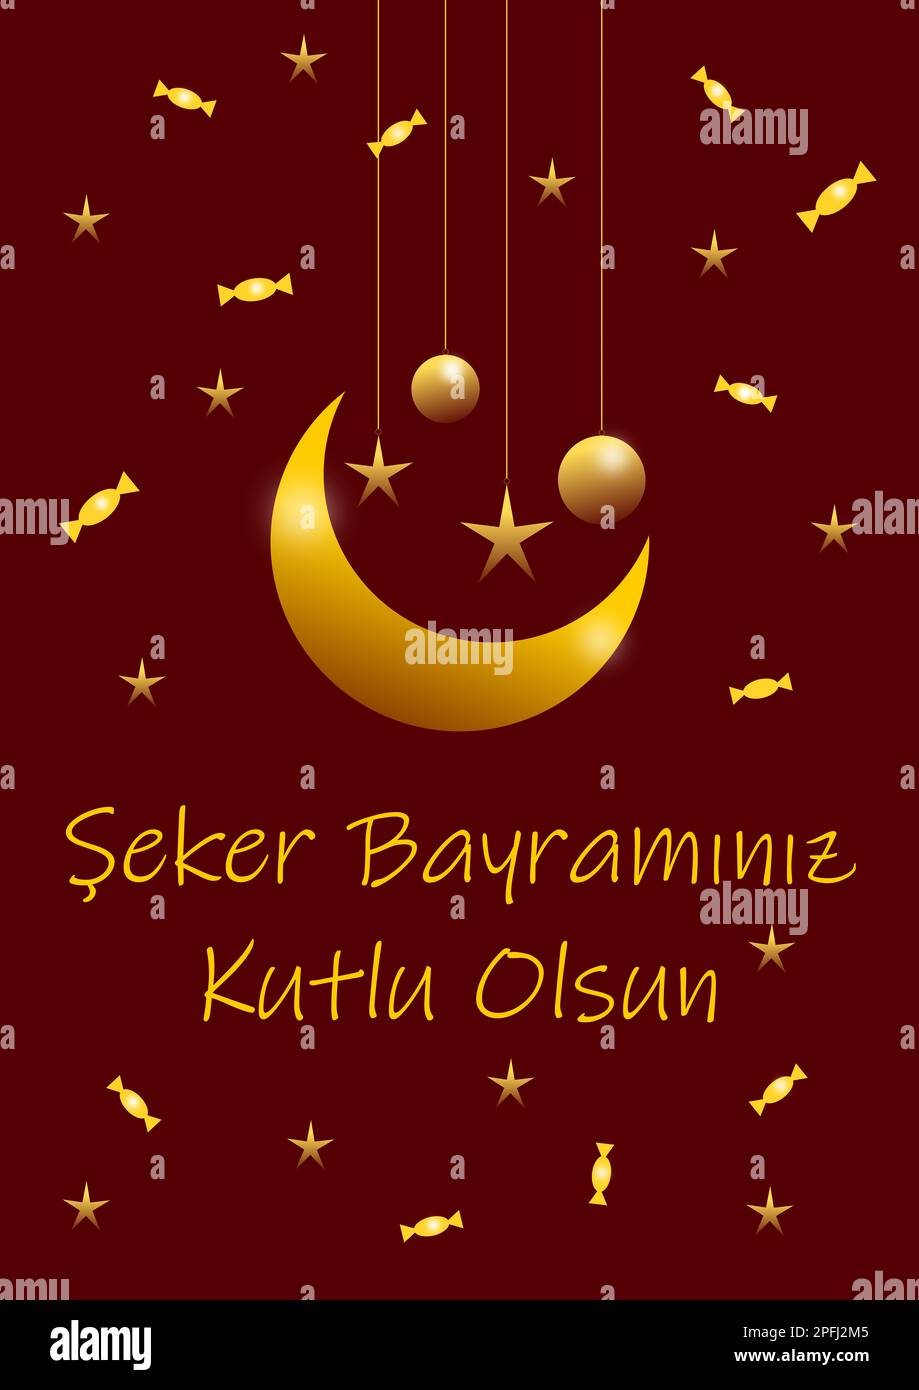 Candy feast banner design in Turkish. Golden stars, balls and, moon on red background. Stock Photo